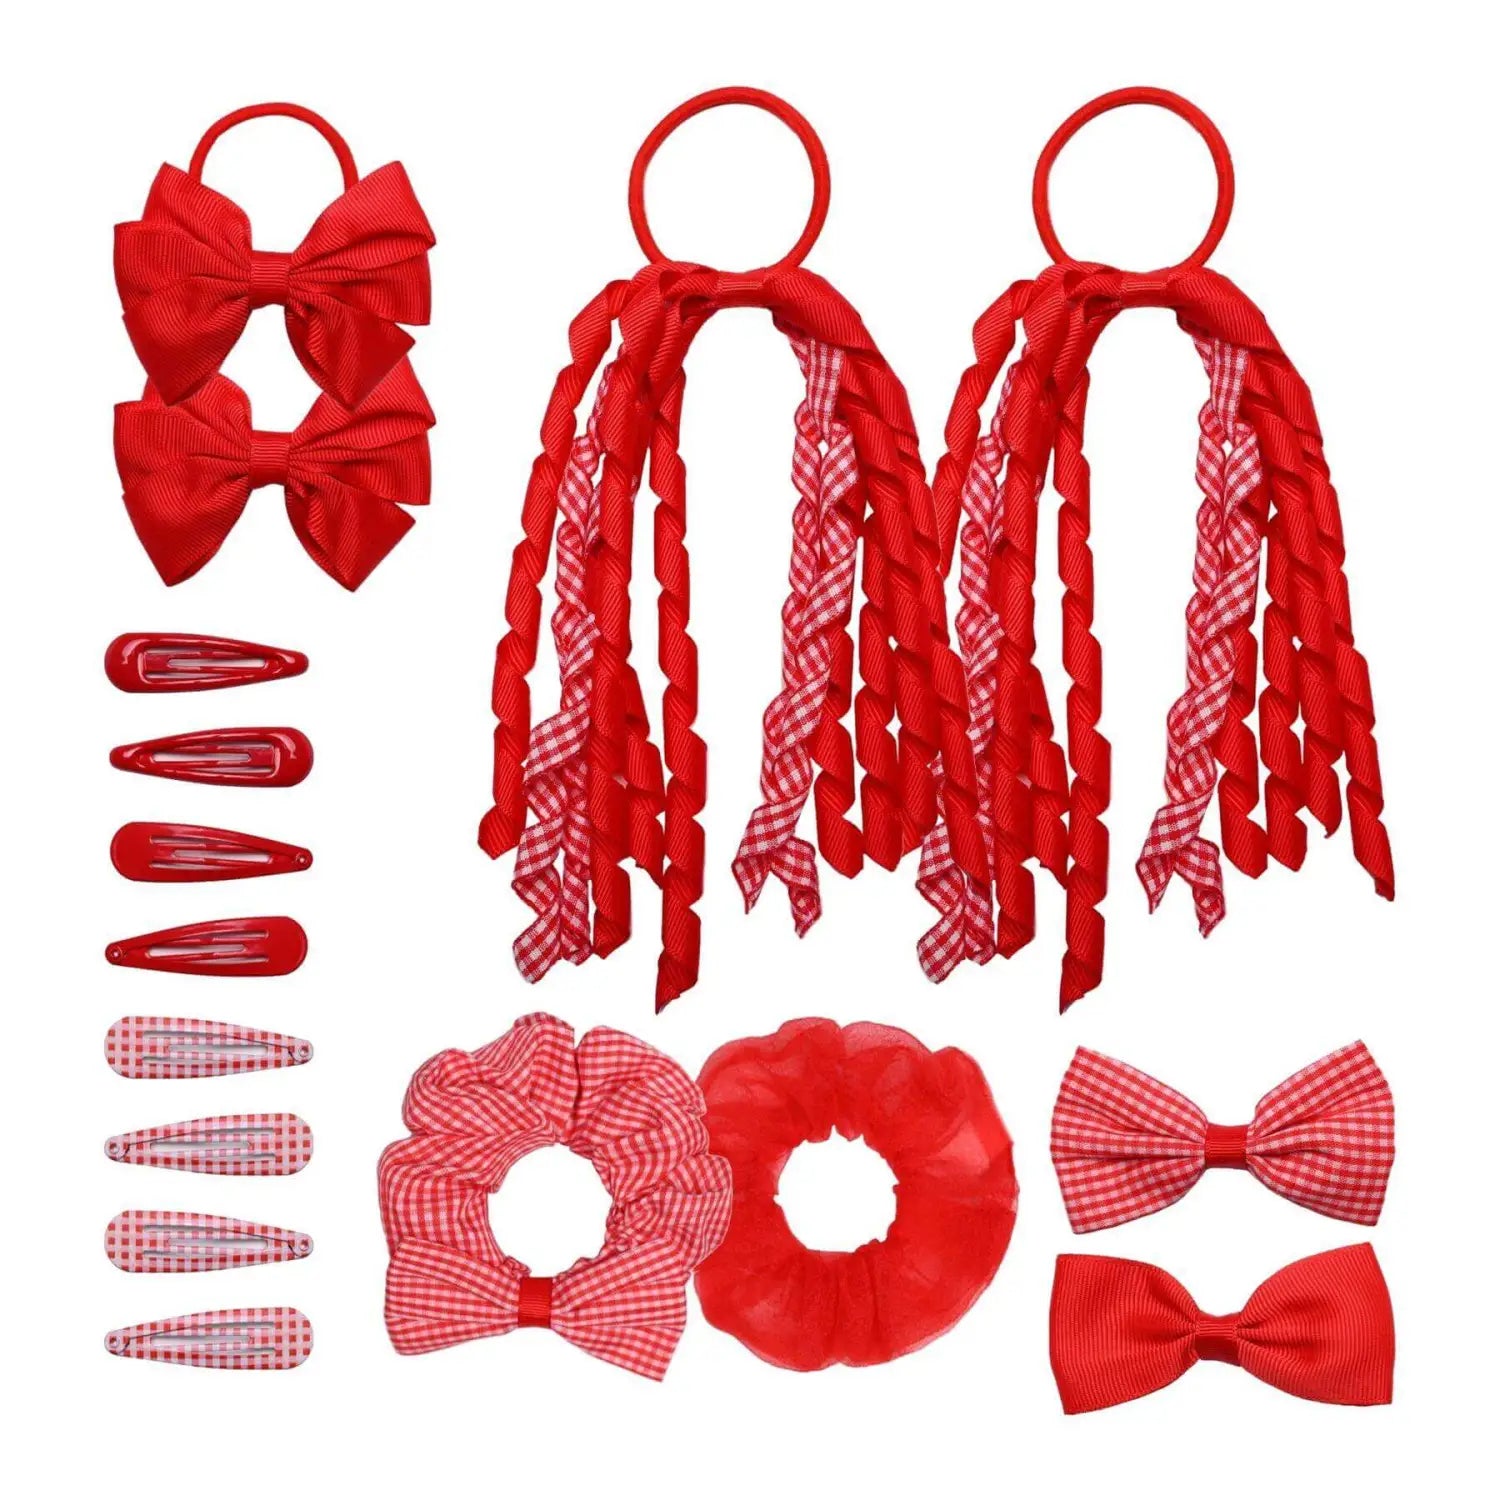 Red and white gingham check school girl hair clips from 16PCS hair accessories set.